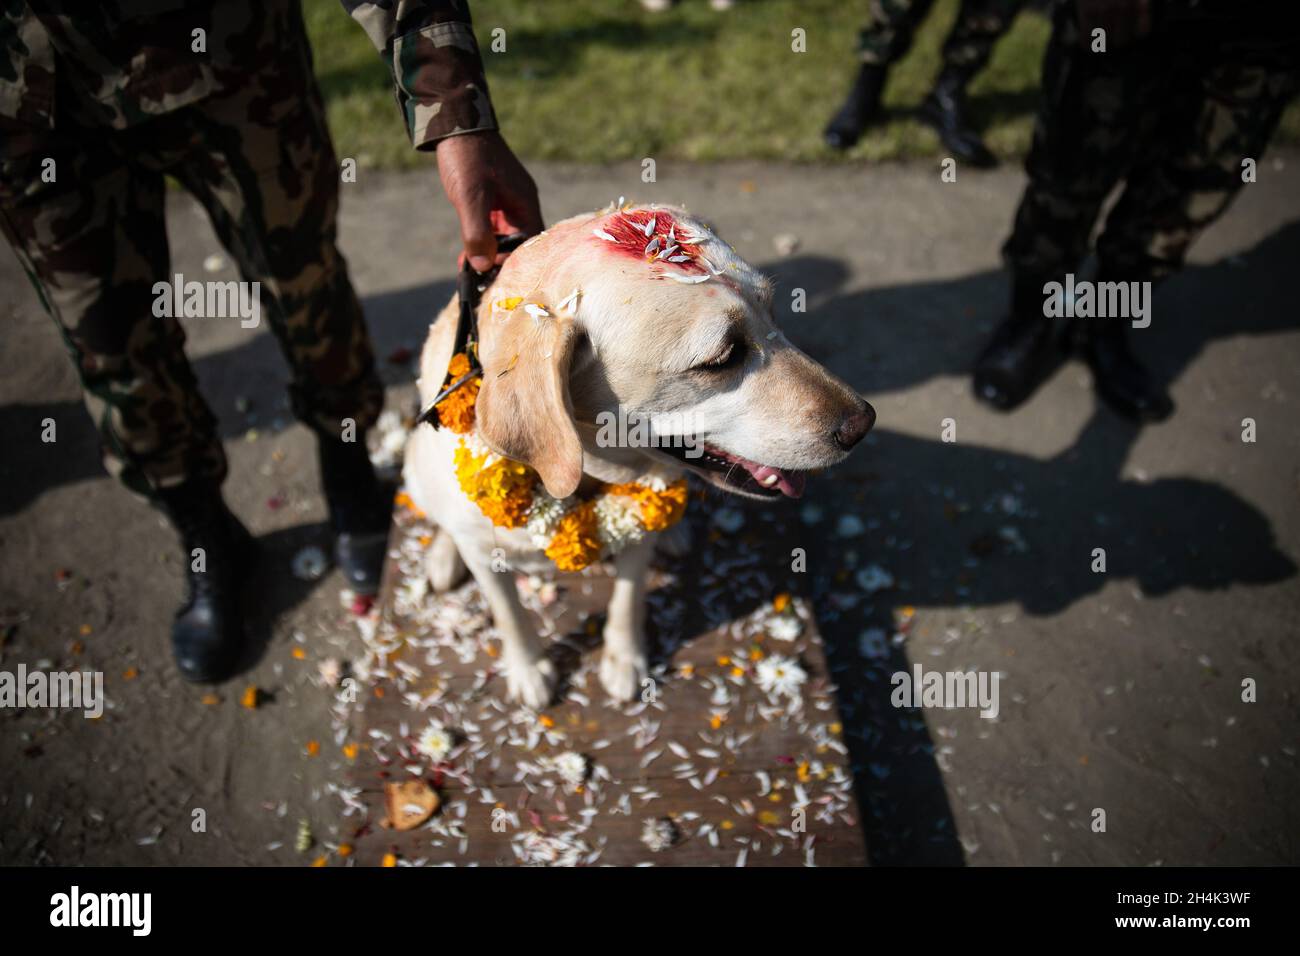 Bhaktapur, Nepal. 03rd Nov, 2021. The Nepalese Army force dog seen decorated with color and flower garlands by its handler during a dog worship day that is celebrated as part of the Tihar festival.Tihar is the second biggest festival of Nepal which is devoted to a different animal or object of worship, including cows, crows and dogs. The festival celebrates the powerful relationship between humans, gods and animals. Credit: SOPA Images Limited/Alamy Live News Stock Photo